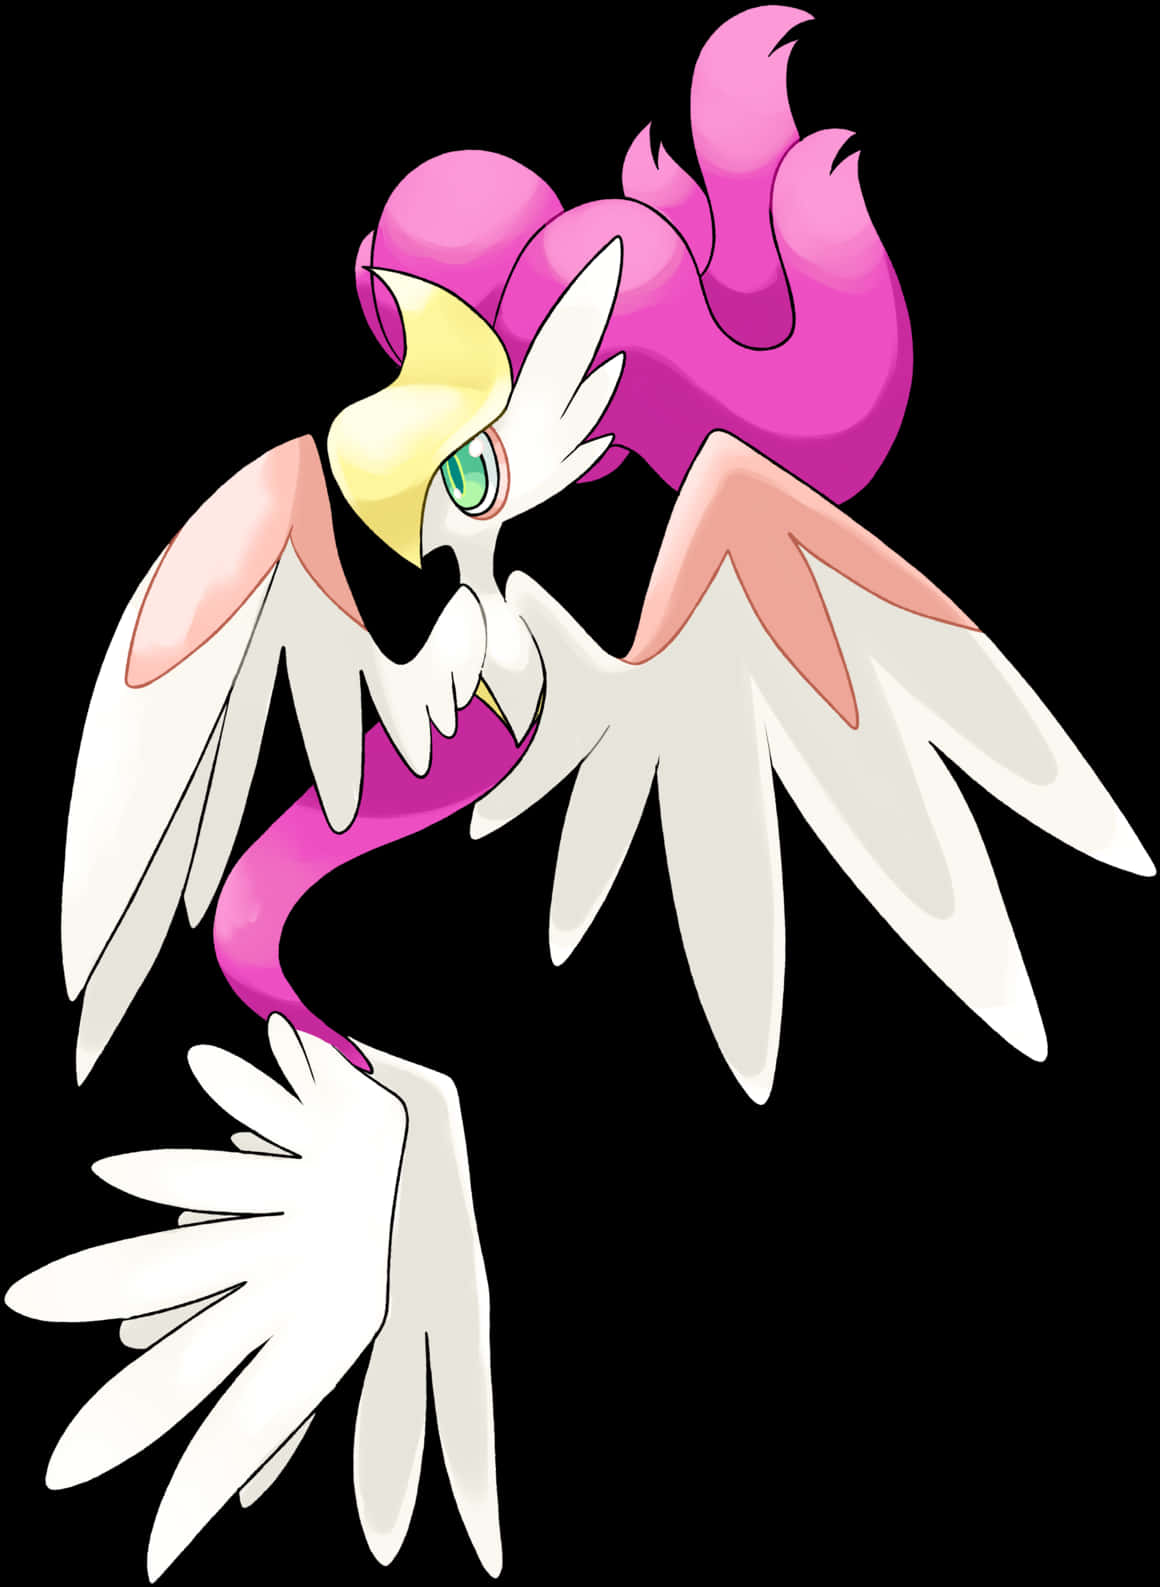 Cartoon Bird With Pink And White Wings